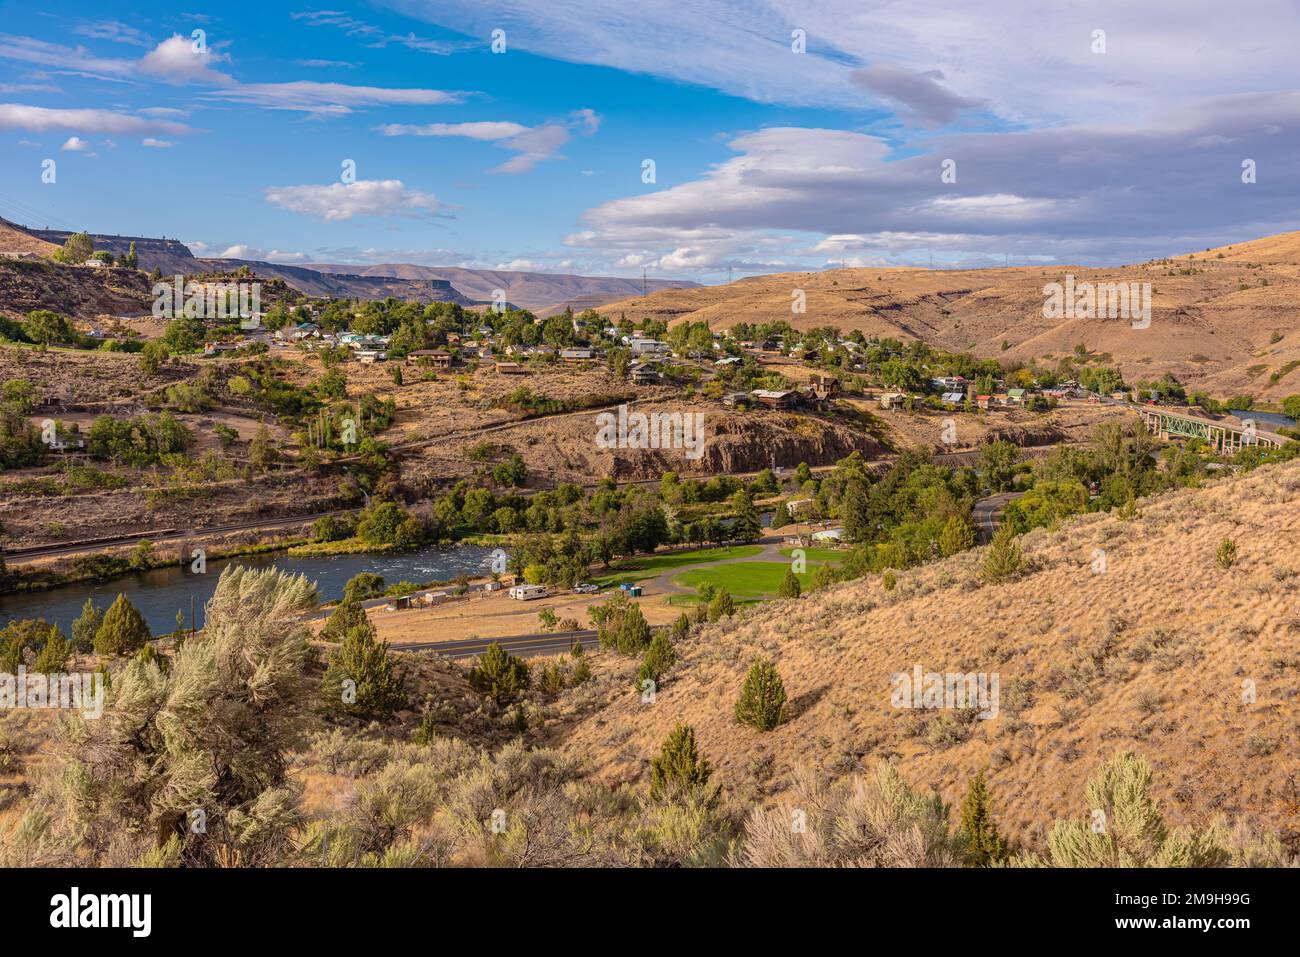 Landscape with distant view of city, Maupin, Oregon, USA Stock Photo